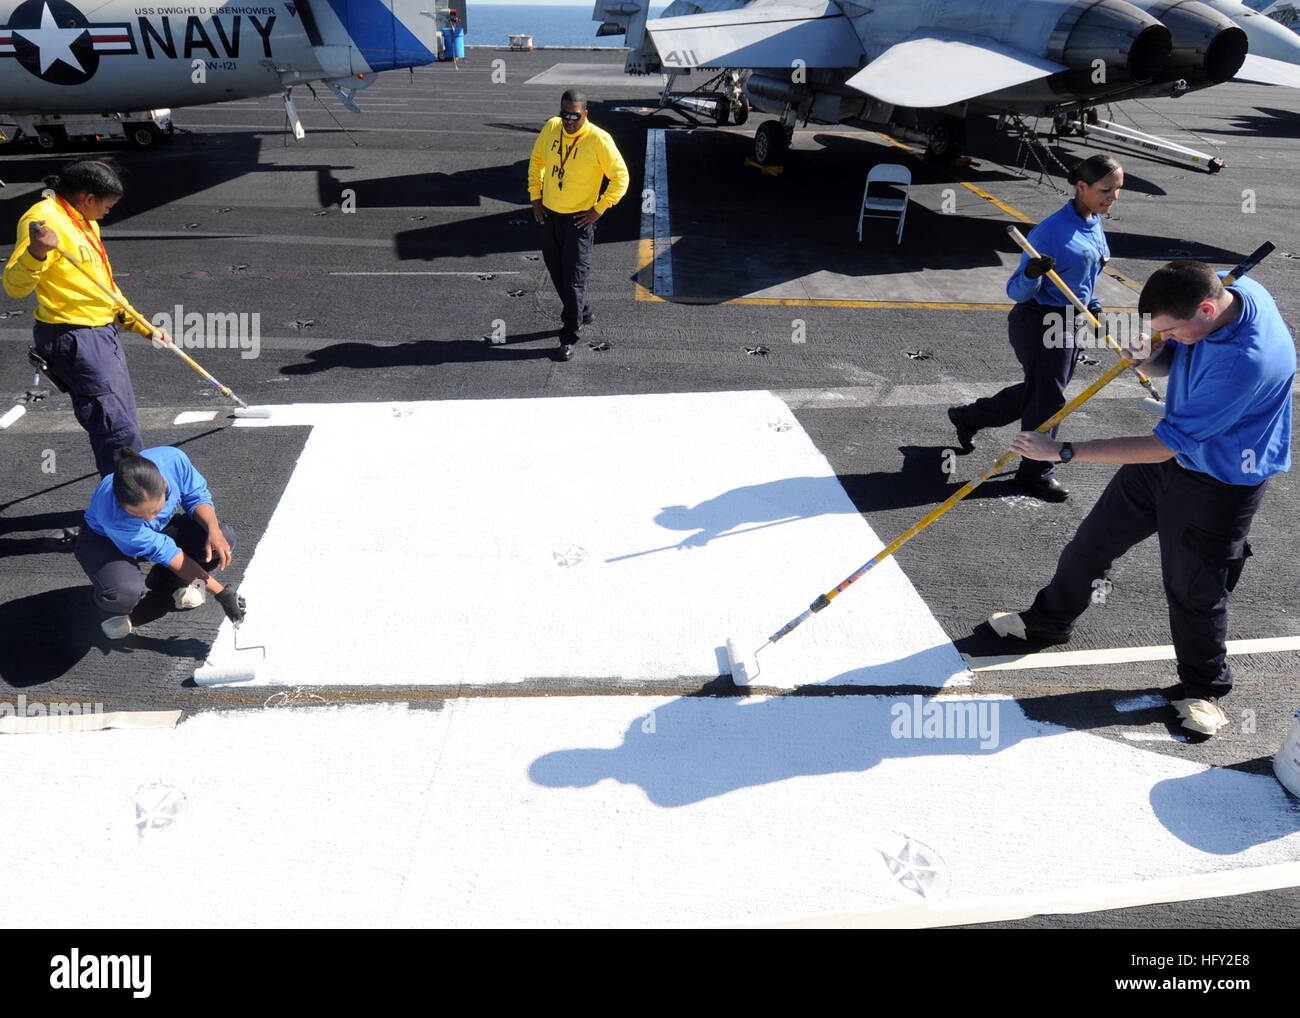 100219-N-4236E-098 GULF OF OMAN (Feb. 19, 2010) Aviation boatswain's mates paint the flight deck during a no-fly-day aboard the Nimitz-class aircraft carrier USS Dwight D. Eisenhower (CVN 69). Dwight D. Eisenhower is on a six-month deployment as a part of the on-going rotation of forward-deployed forces. (U.S. Navy photo by Mass Communication Specialist 3rd Class Chad R. Erdmann/Released) US Navy 100219-N-4236E-098 Aviation boatswain's mates paint the flight deck during a no-fly-day aboard the Nimitz-class aircraft carrier USS Dwight D. Eisenhower (CVN 69) Stock Photo